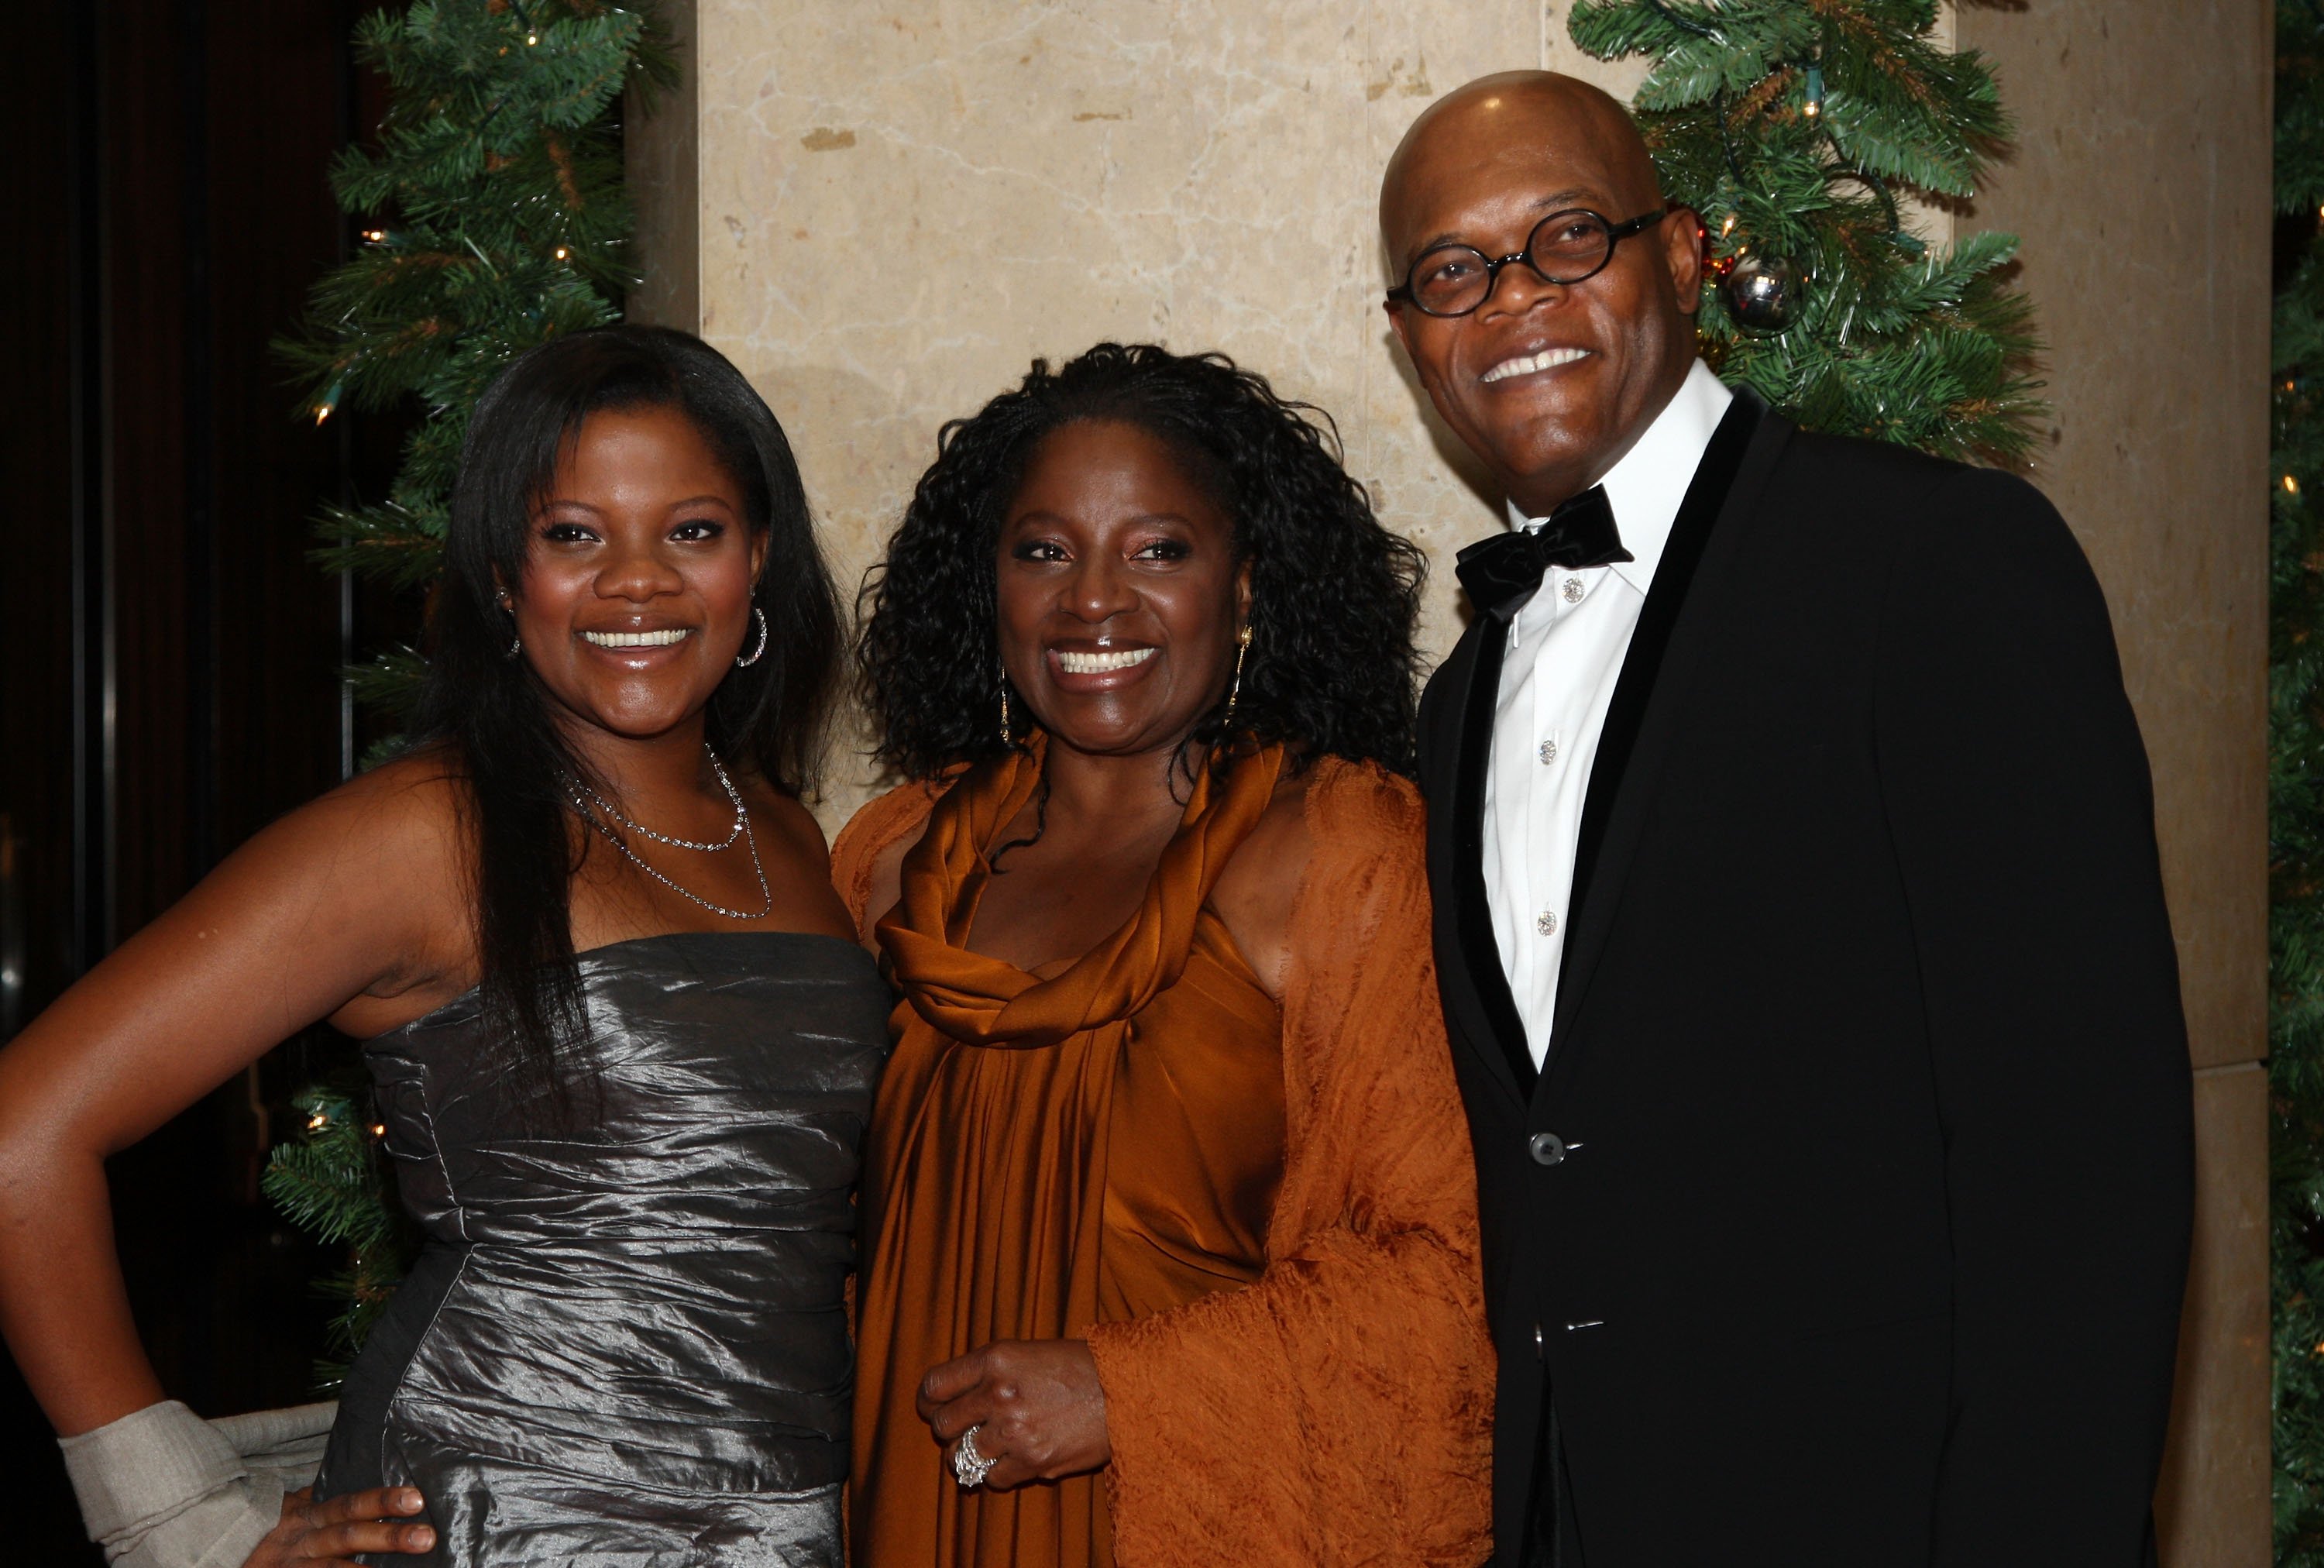 Samuel L. Jackson (far R), wife LaTanya Richardson (C) and daughter Zoe Jackson arrive at the 23rd annual American Cinematheque show honoring Samuel L. Jackson held at Beverly Hilton Hotel on December 1, 2008, in Beverly Hills, California. | Source: Getty Images.